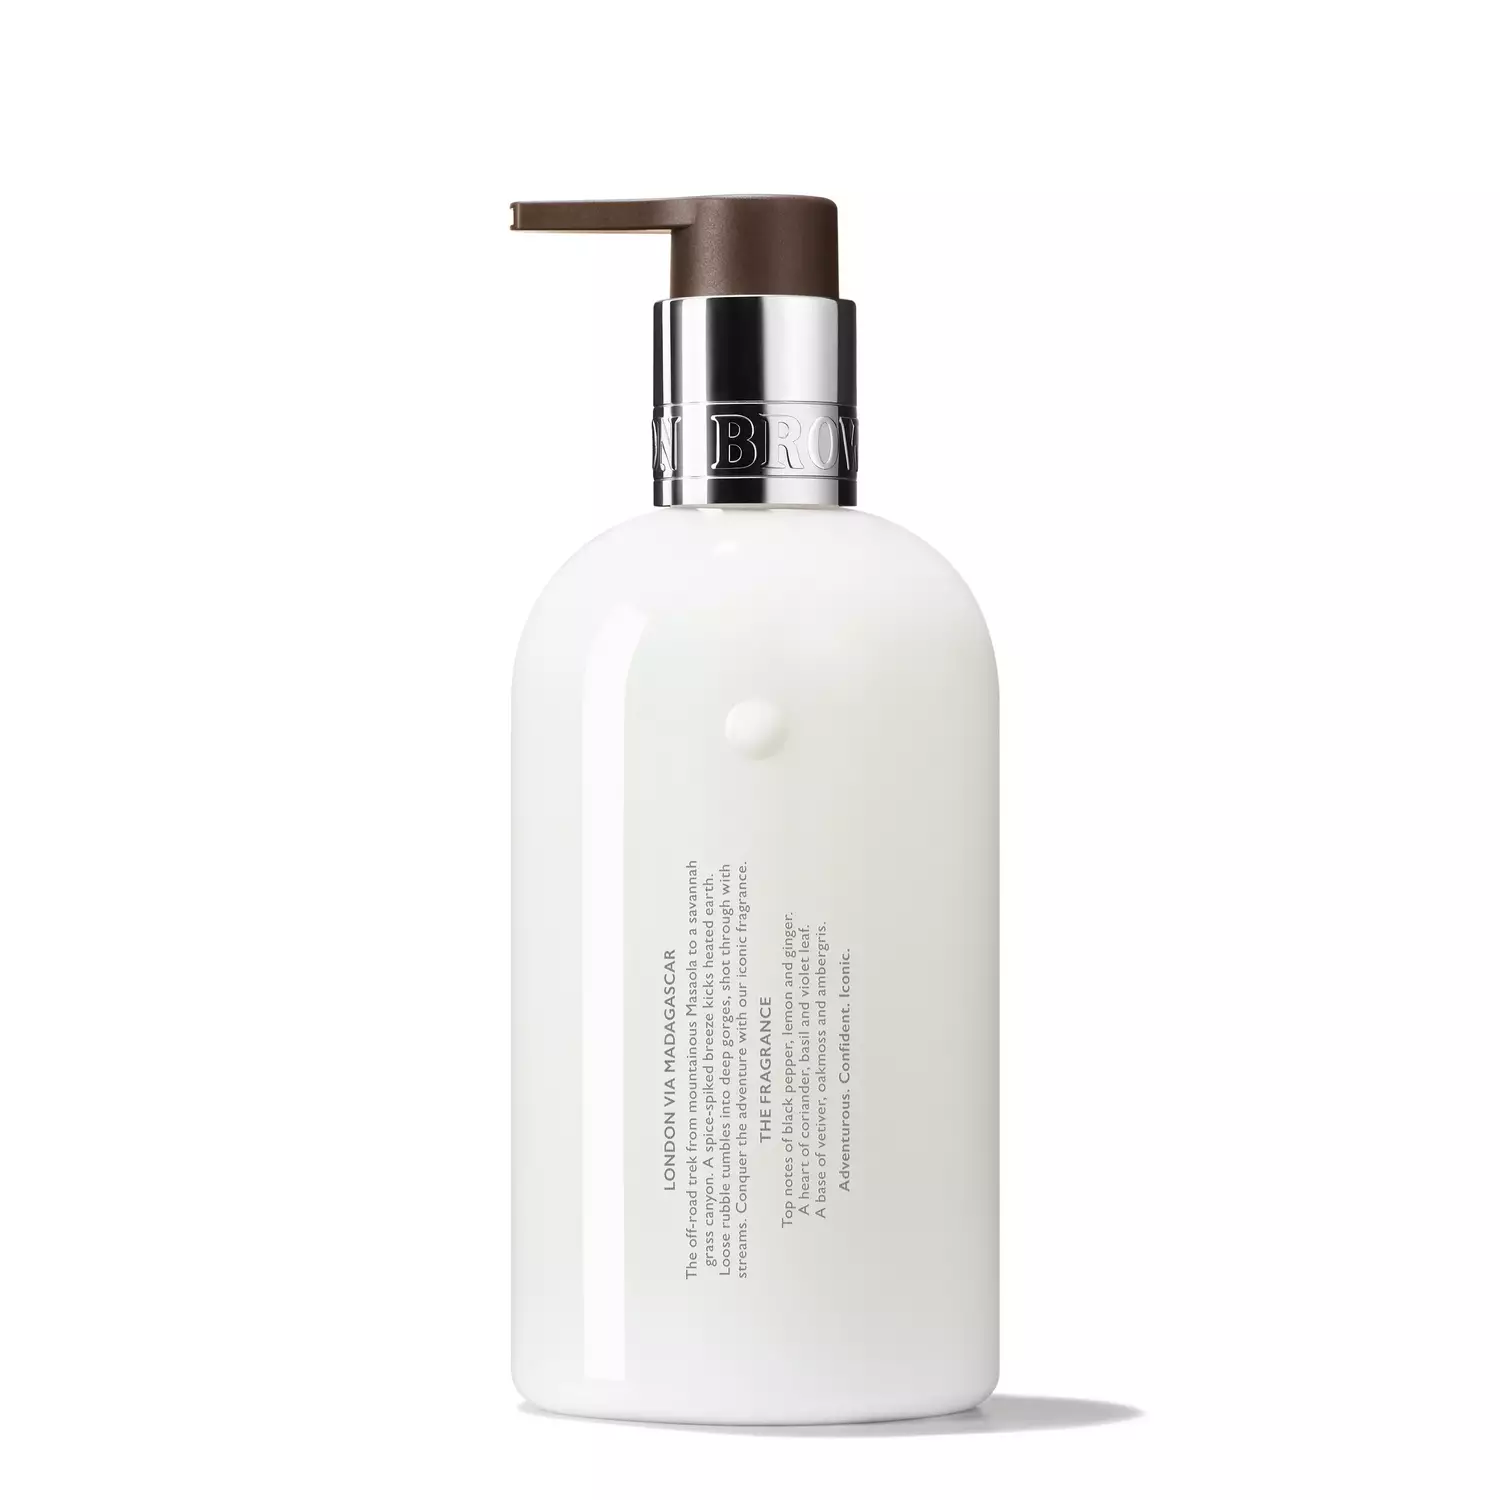 Molton Brown - Re-Charge Black Pepper - Body Lotion 